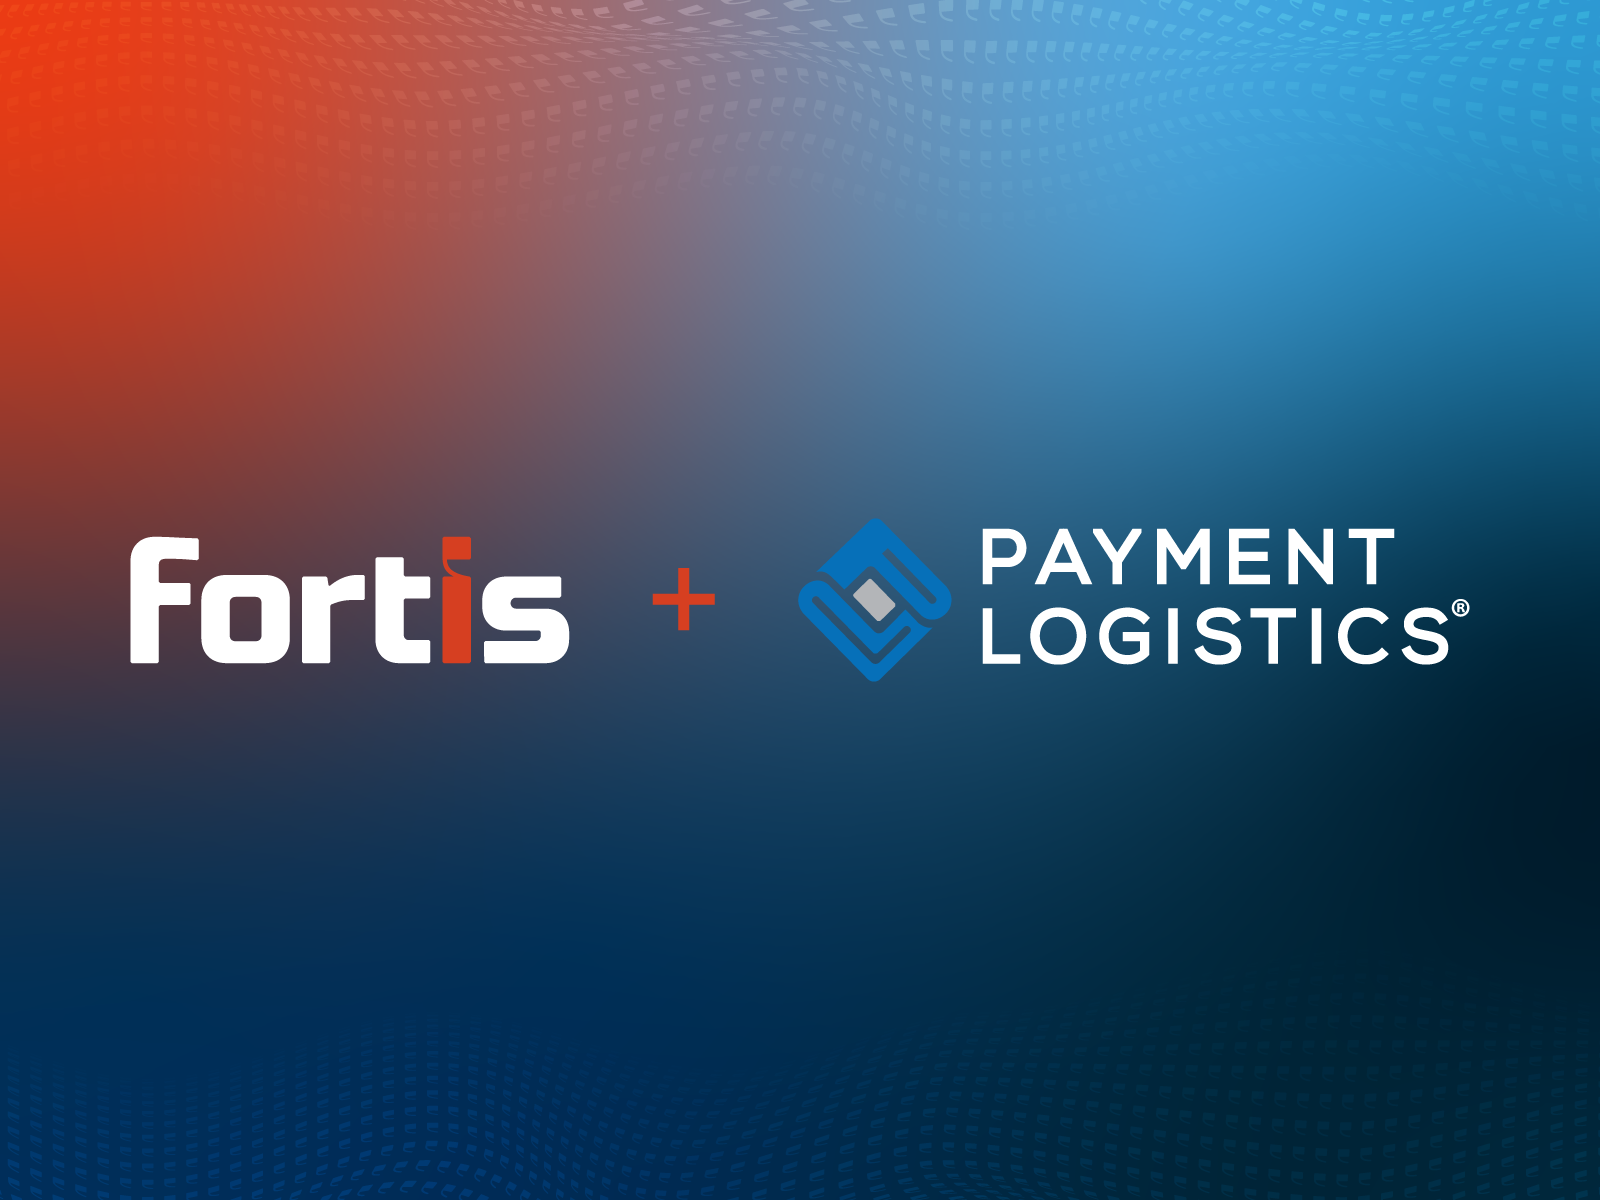 Fortis Acquires Payment Logistics Expanding Its Embedded Payments Footprint & Technology Stack - Featured Image